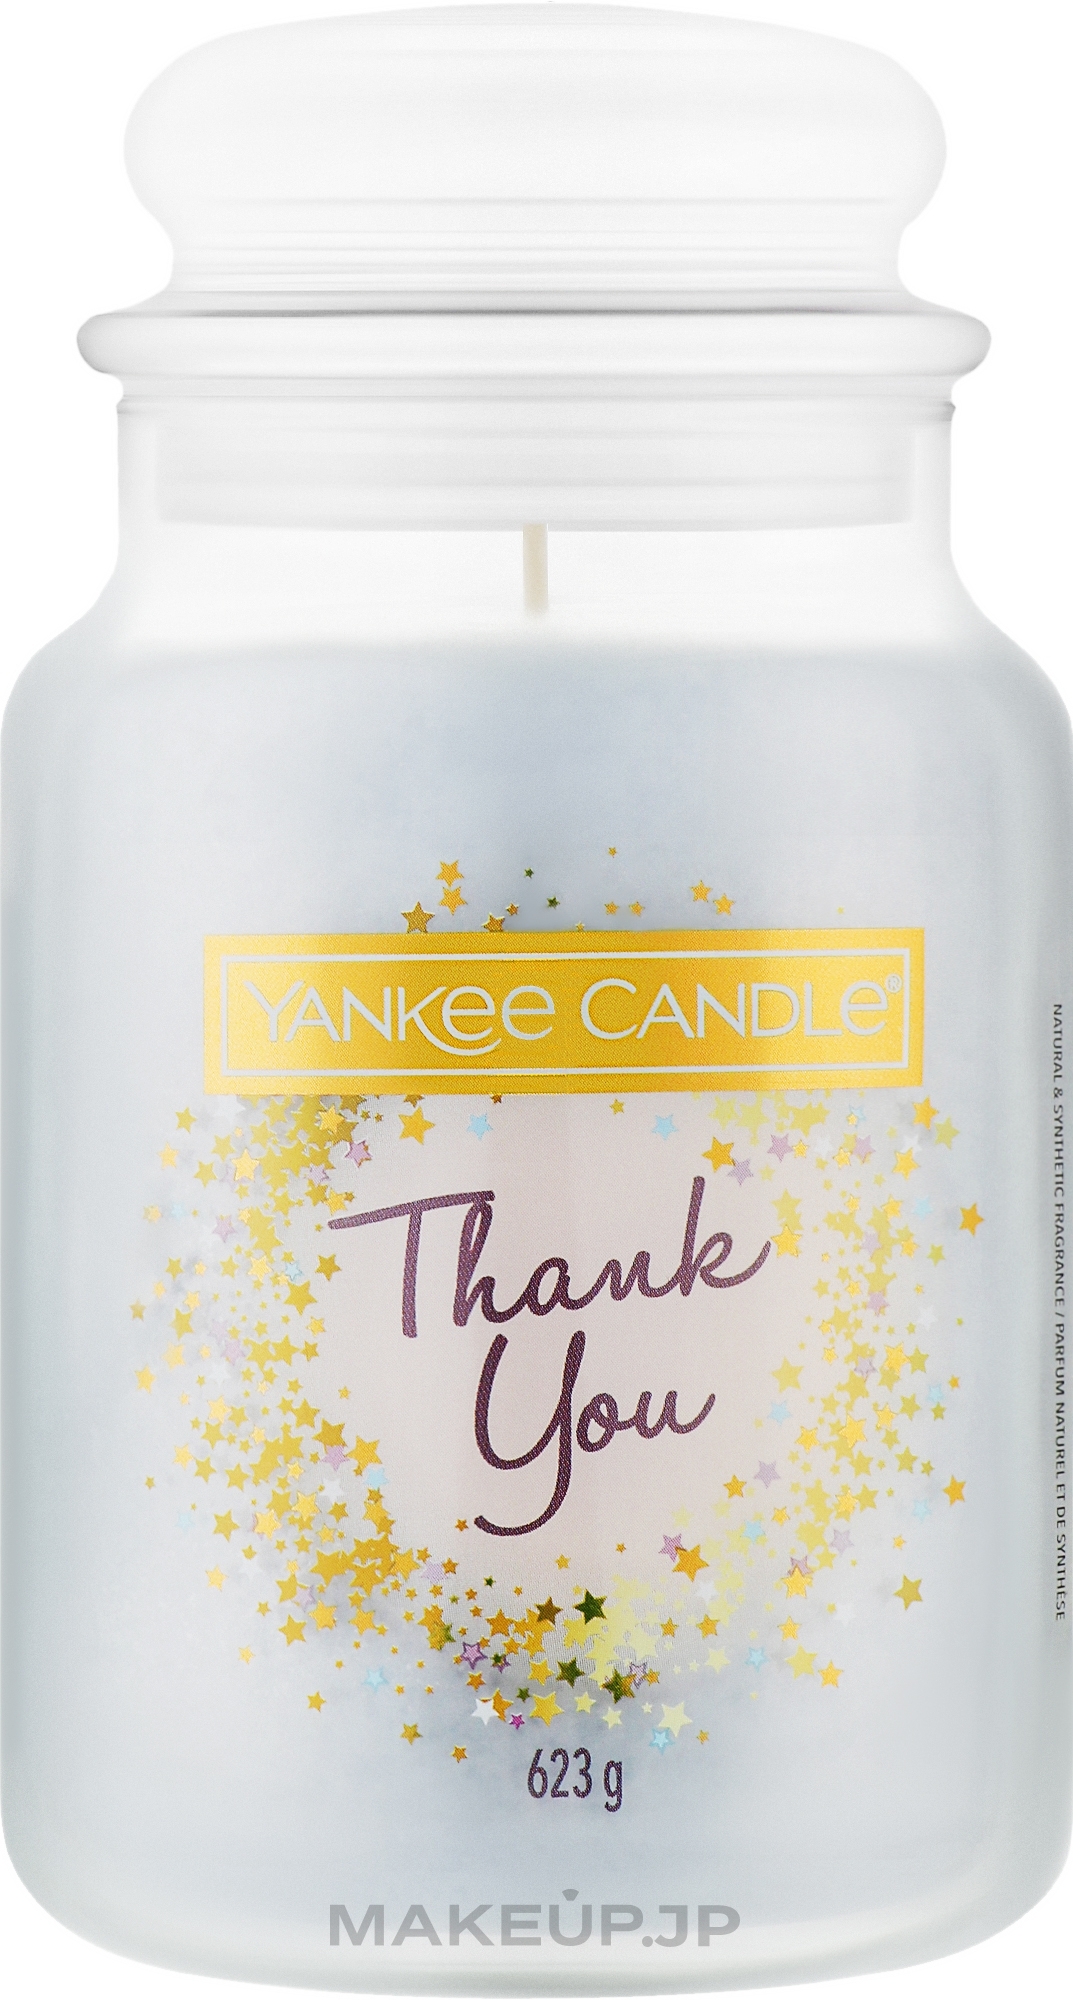 Scented Candle 'Thank You' - Yankee Candle Thank You Scented Candle — photo 623 g